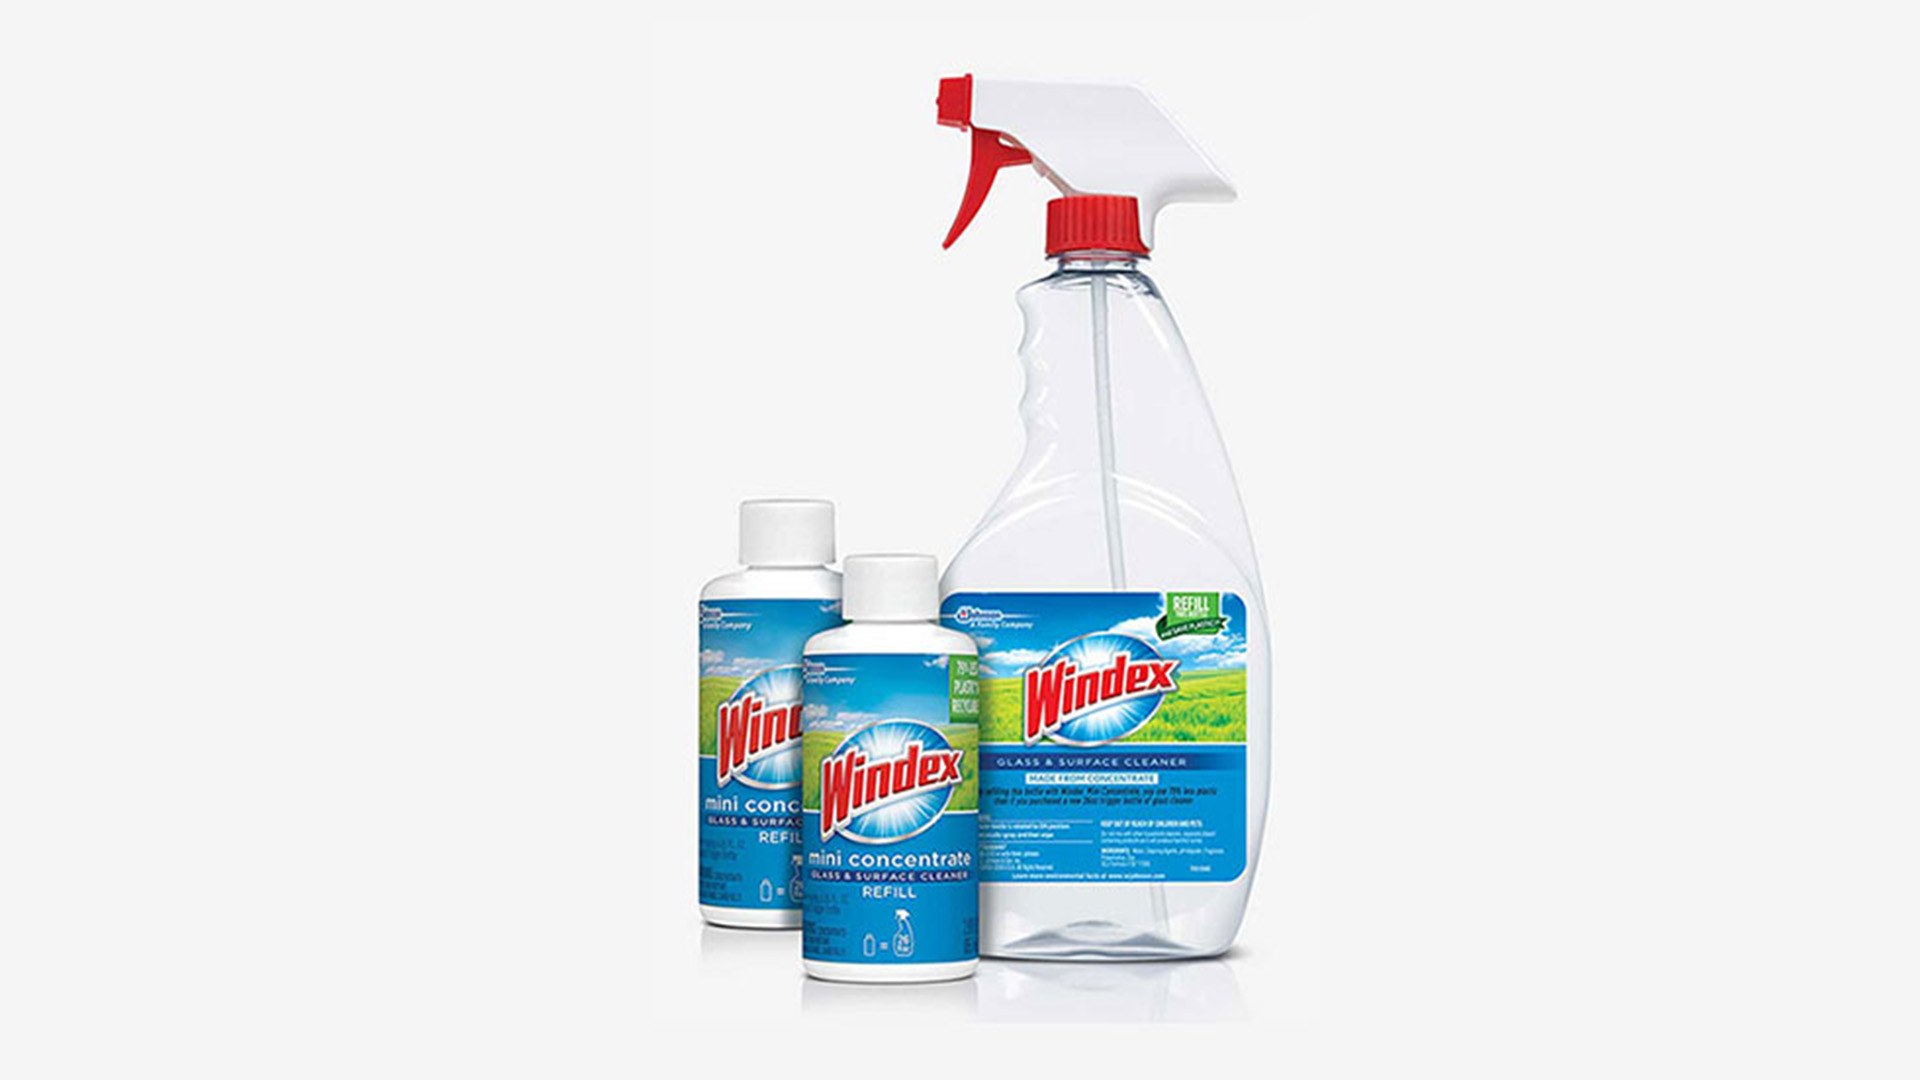 Concentrated refills enable reuse of home cleaning trigger spray bottles.